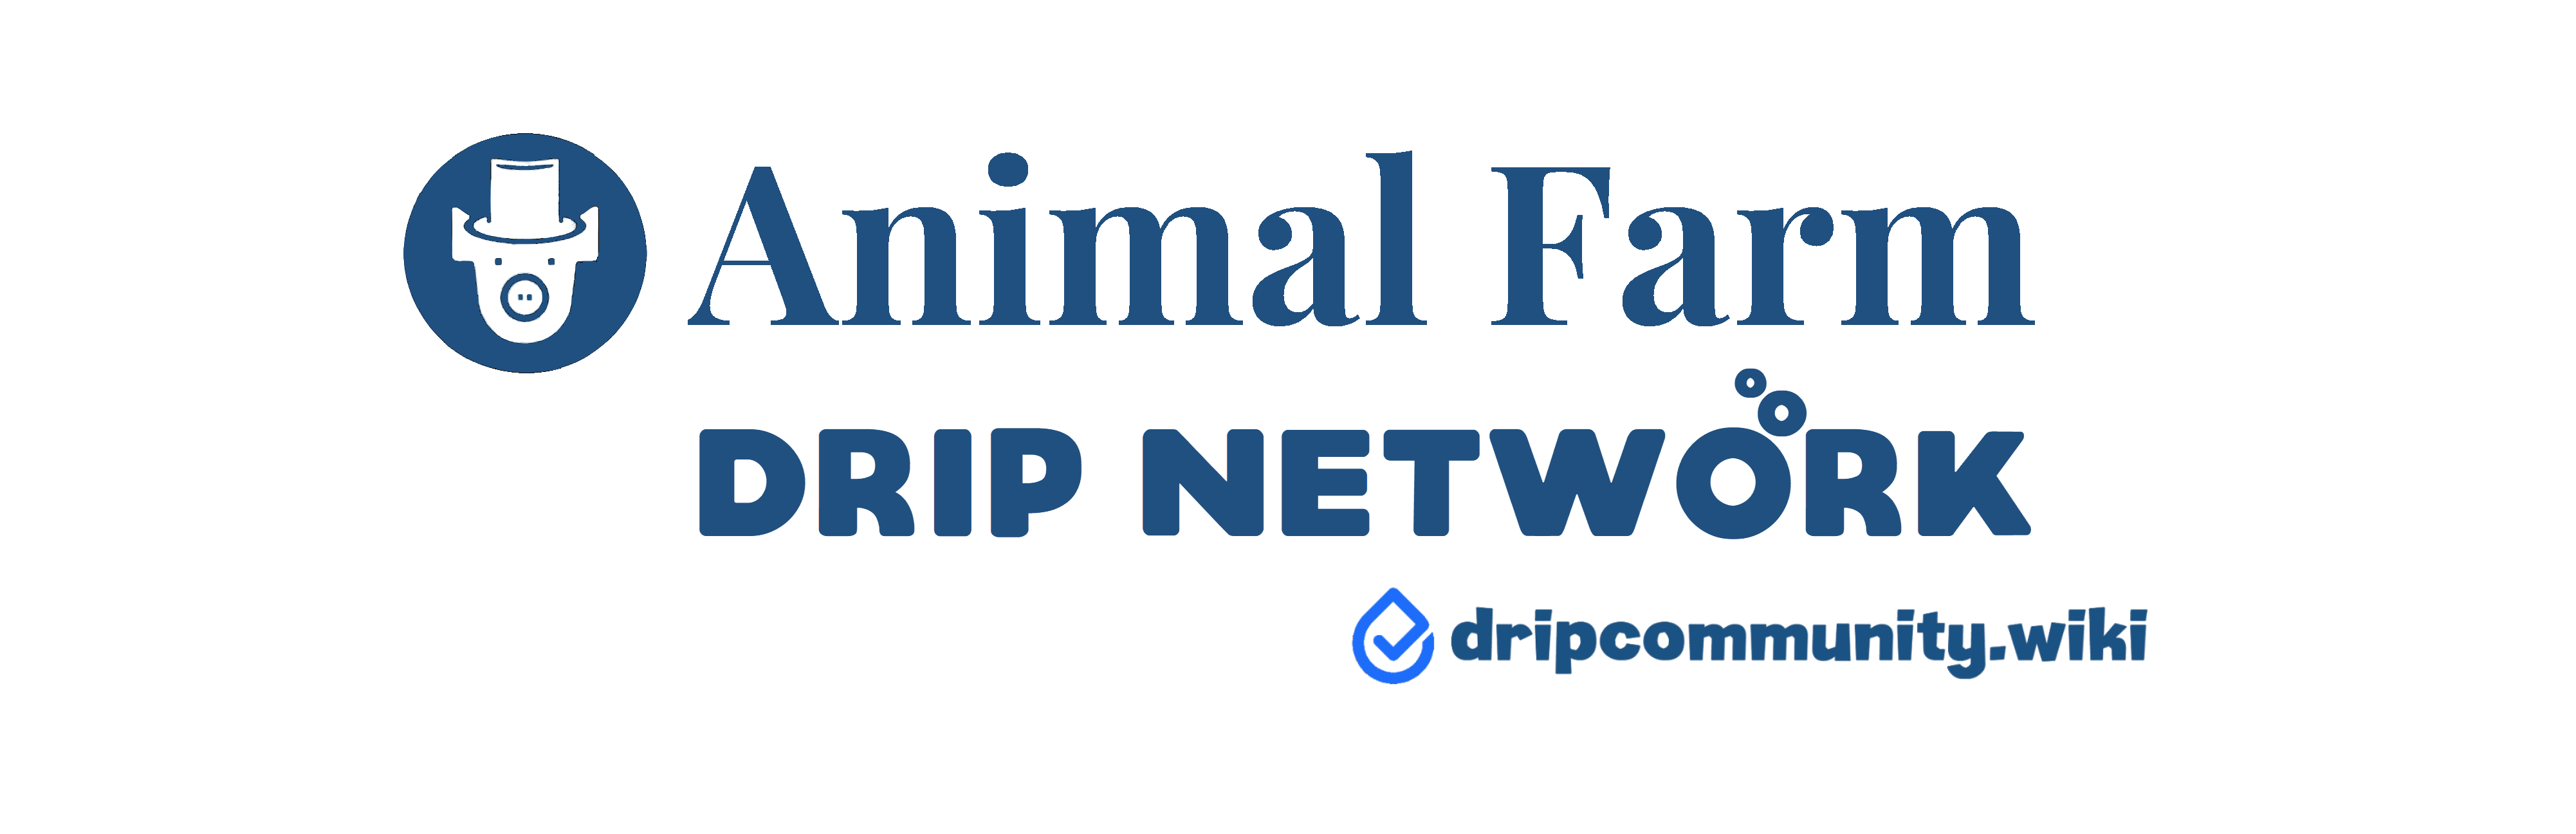 wikiDRIP is the official wiki page introducing Drip Network and Animal Farm. Learn more about the roadmap, how to get in and how the best crypto DeFi project works.